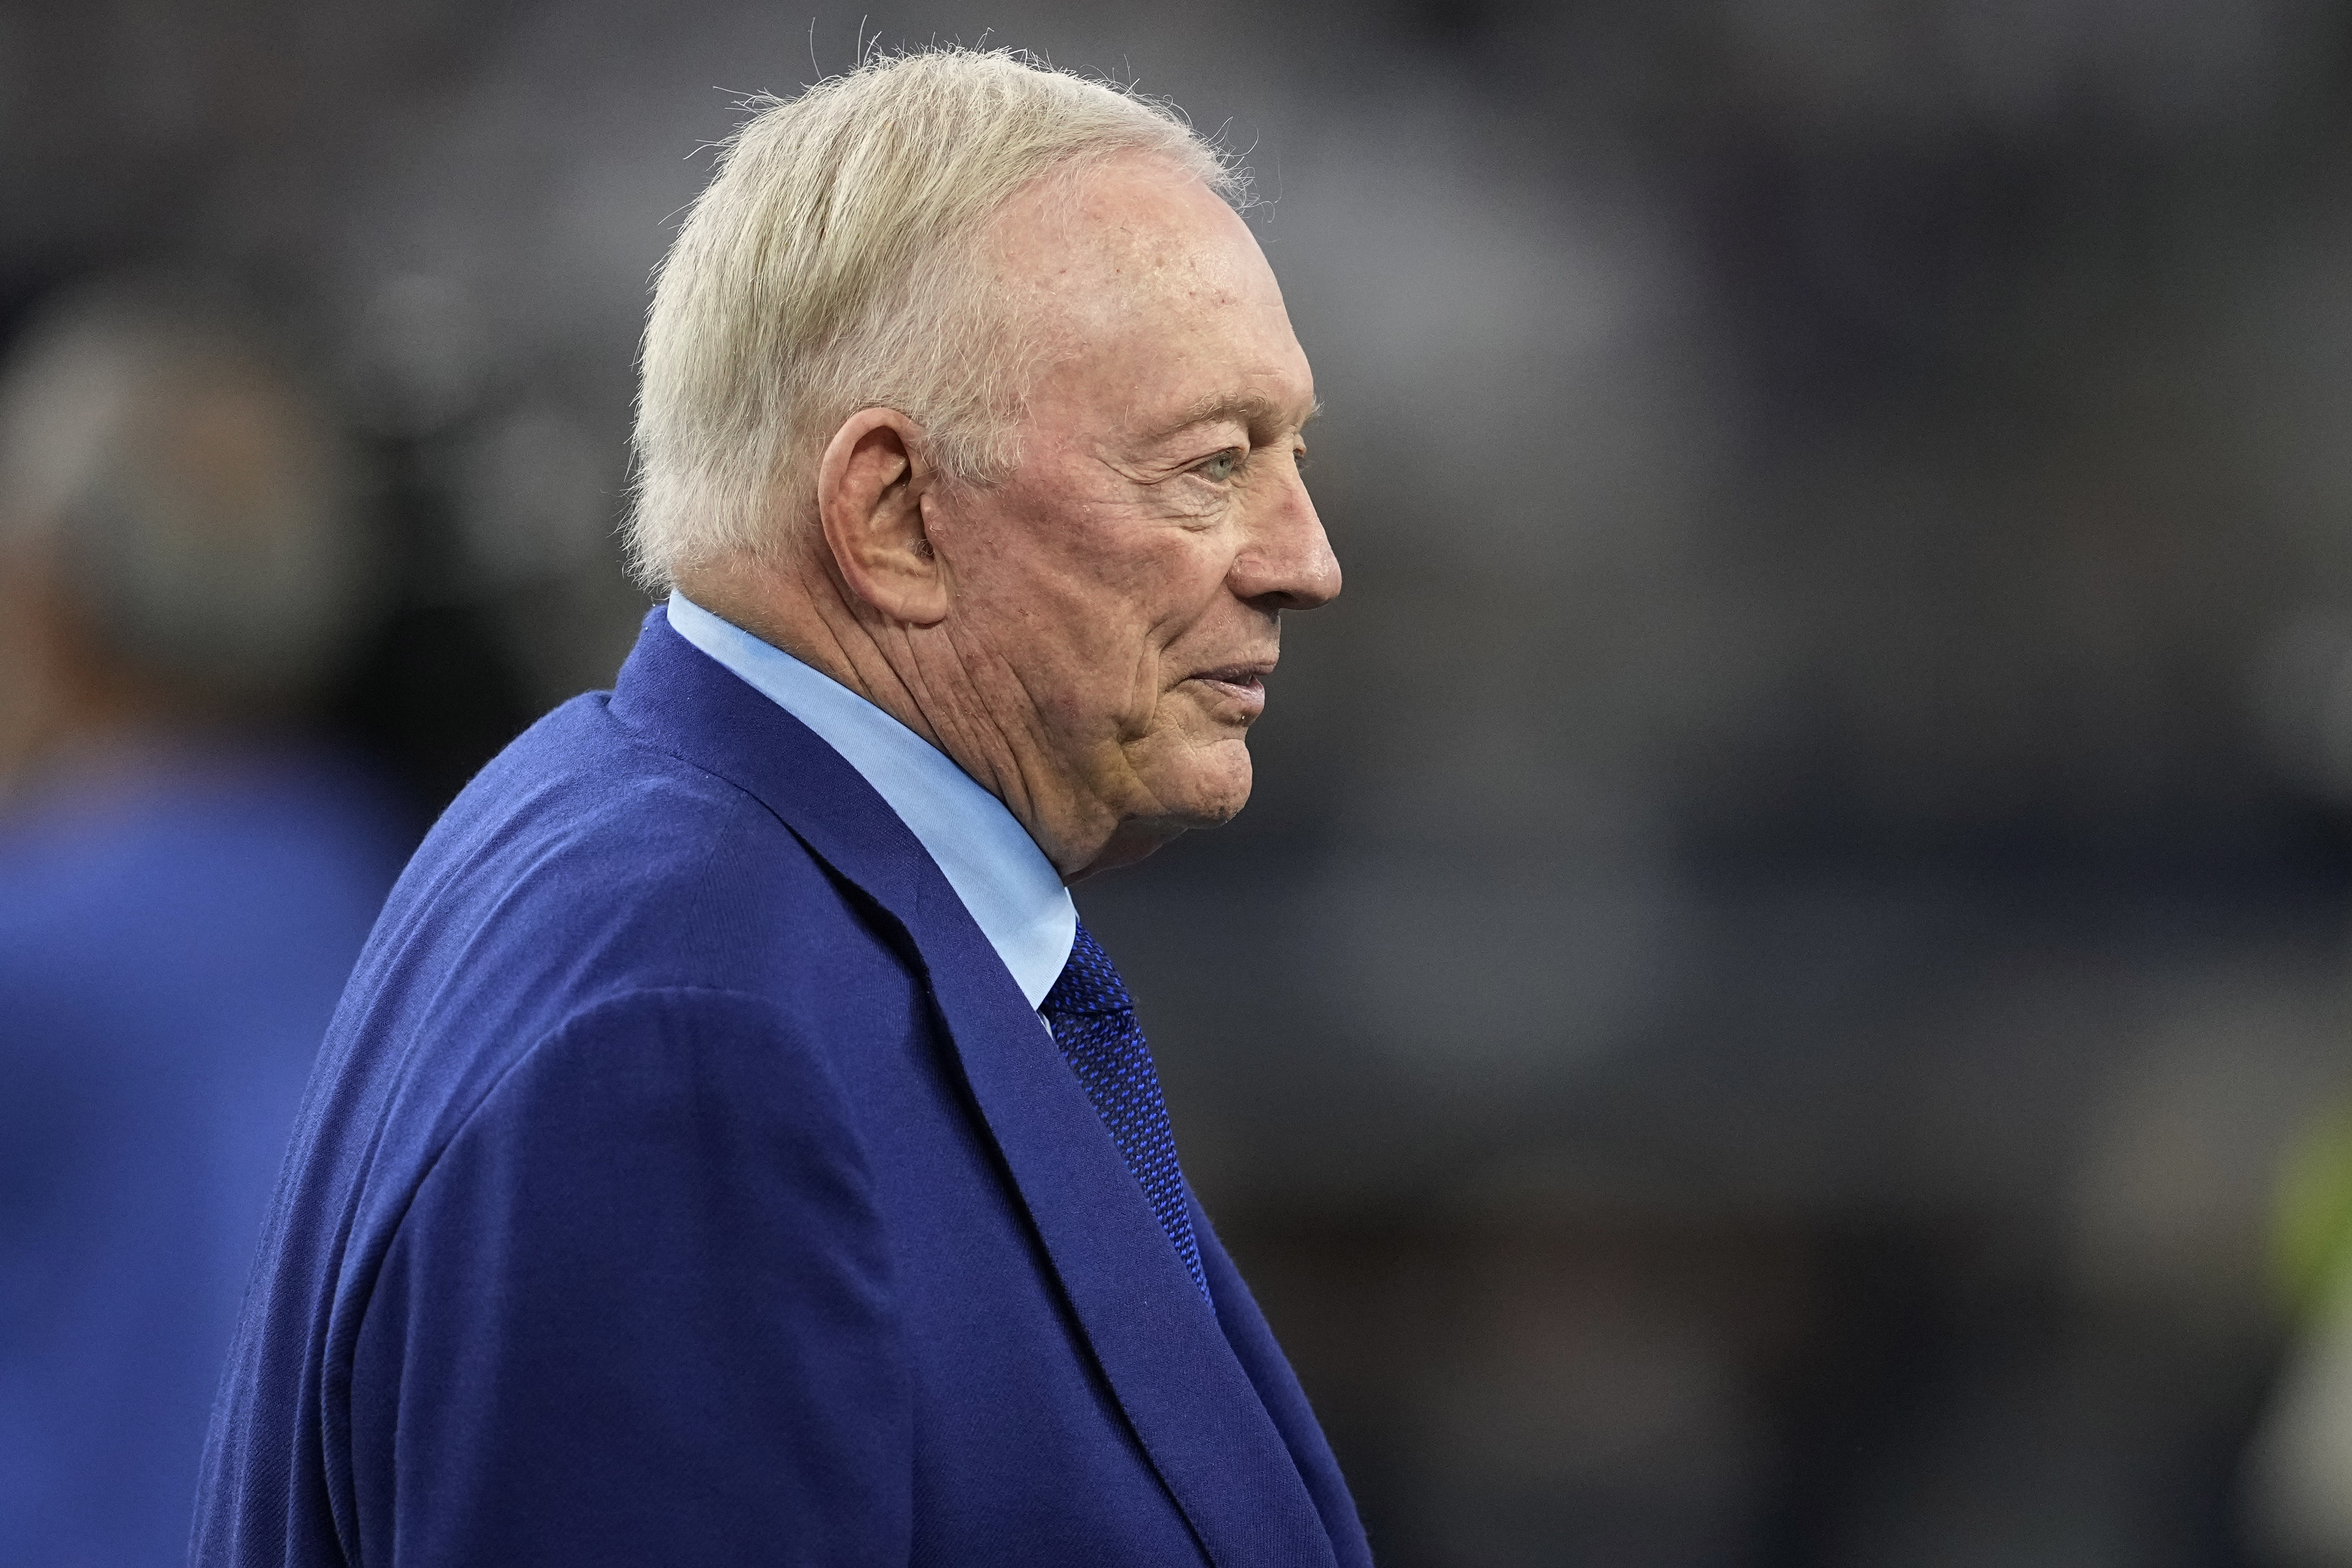 Cowboys owner Jerry Jones still loves the spotlight in his 80s, despite  reasons to shrink from it | AP News